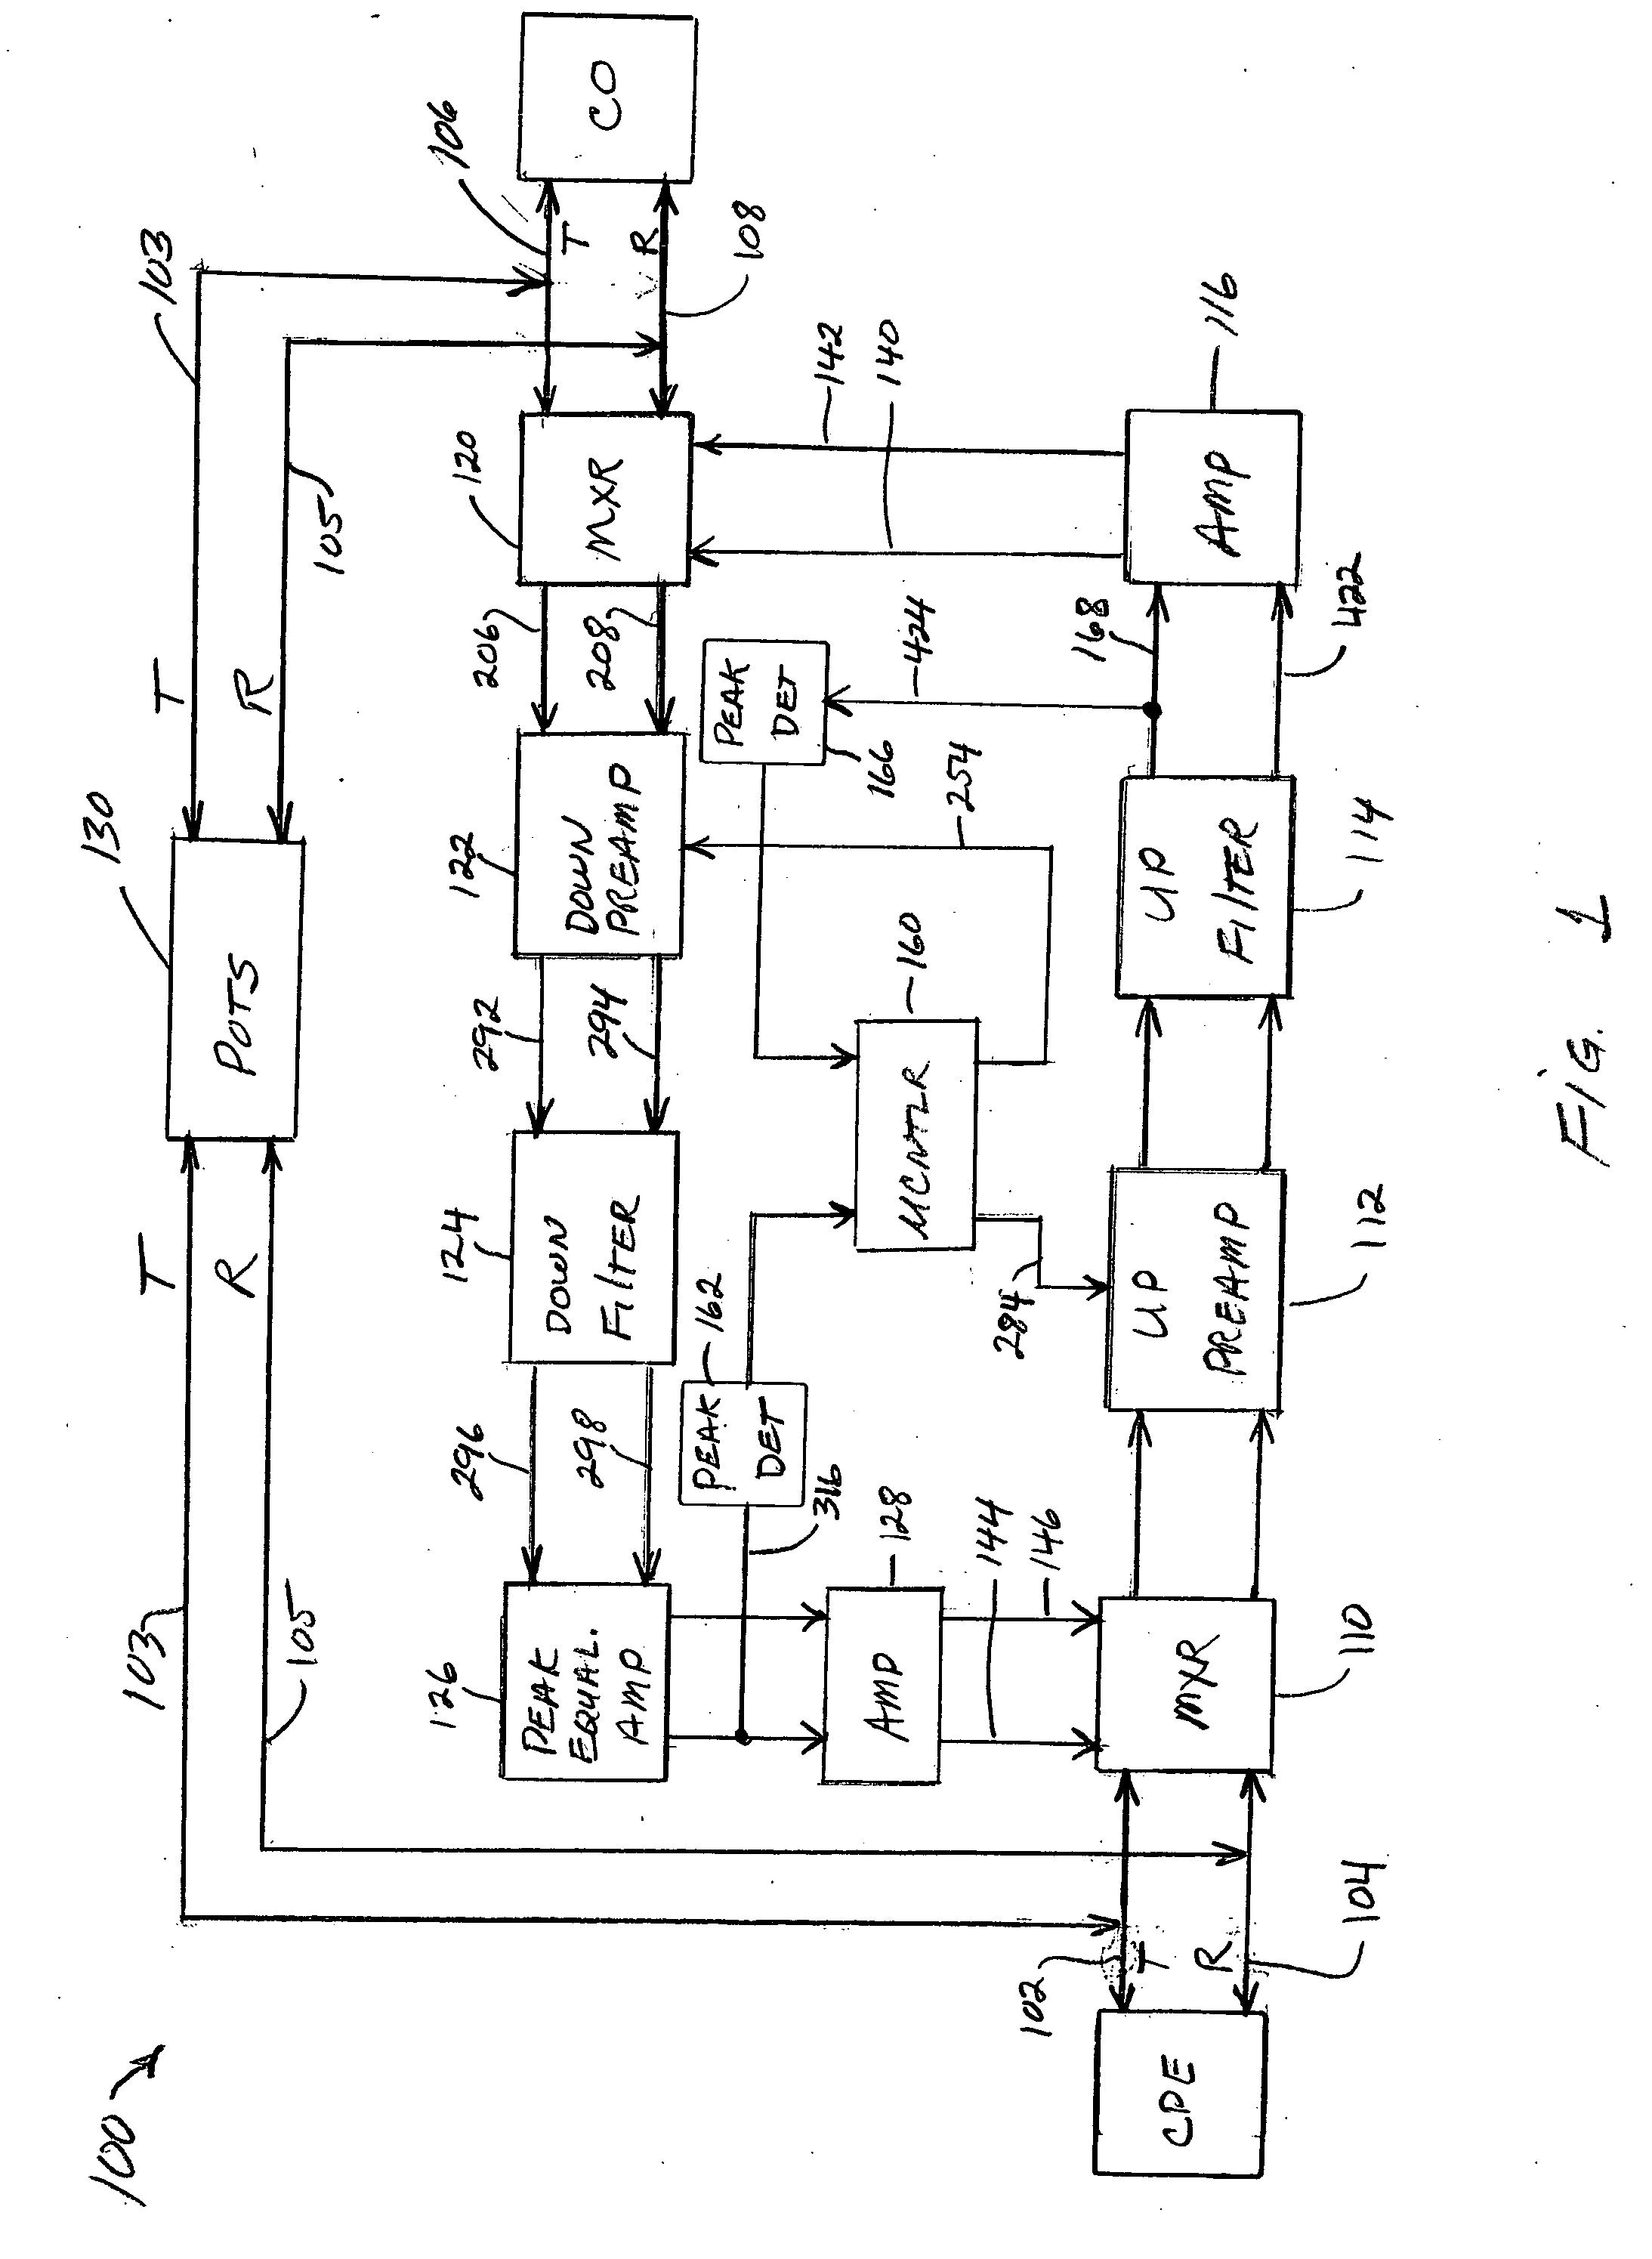 High performance ADSL line conditioner system and method